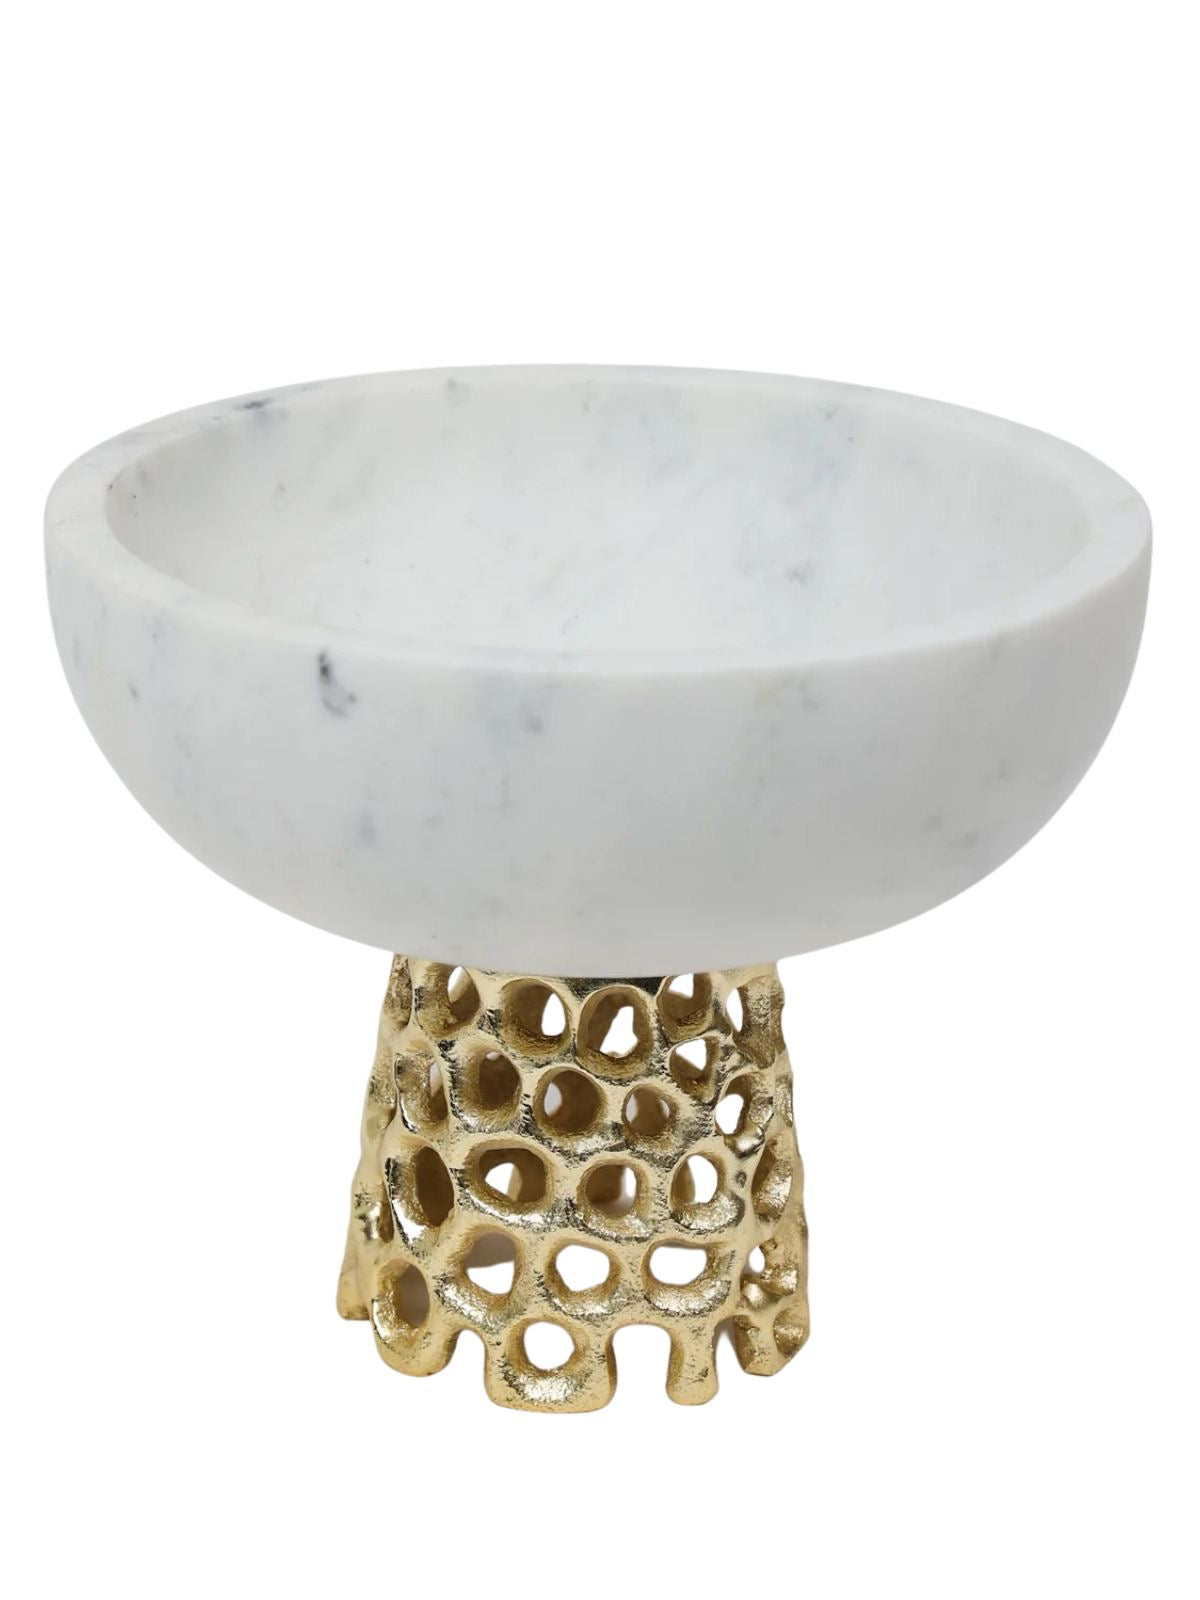 Marble Bowl with Web Cutout Gold Metal Base Sold by KYA Home Decor, 5.75H x 7W.